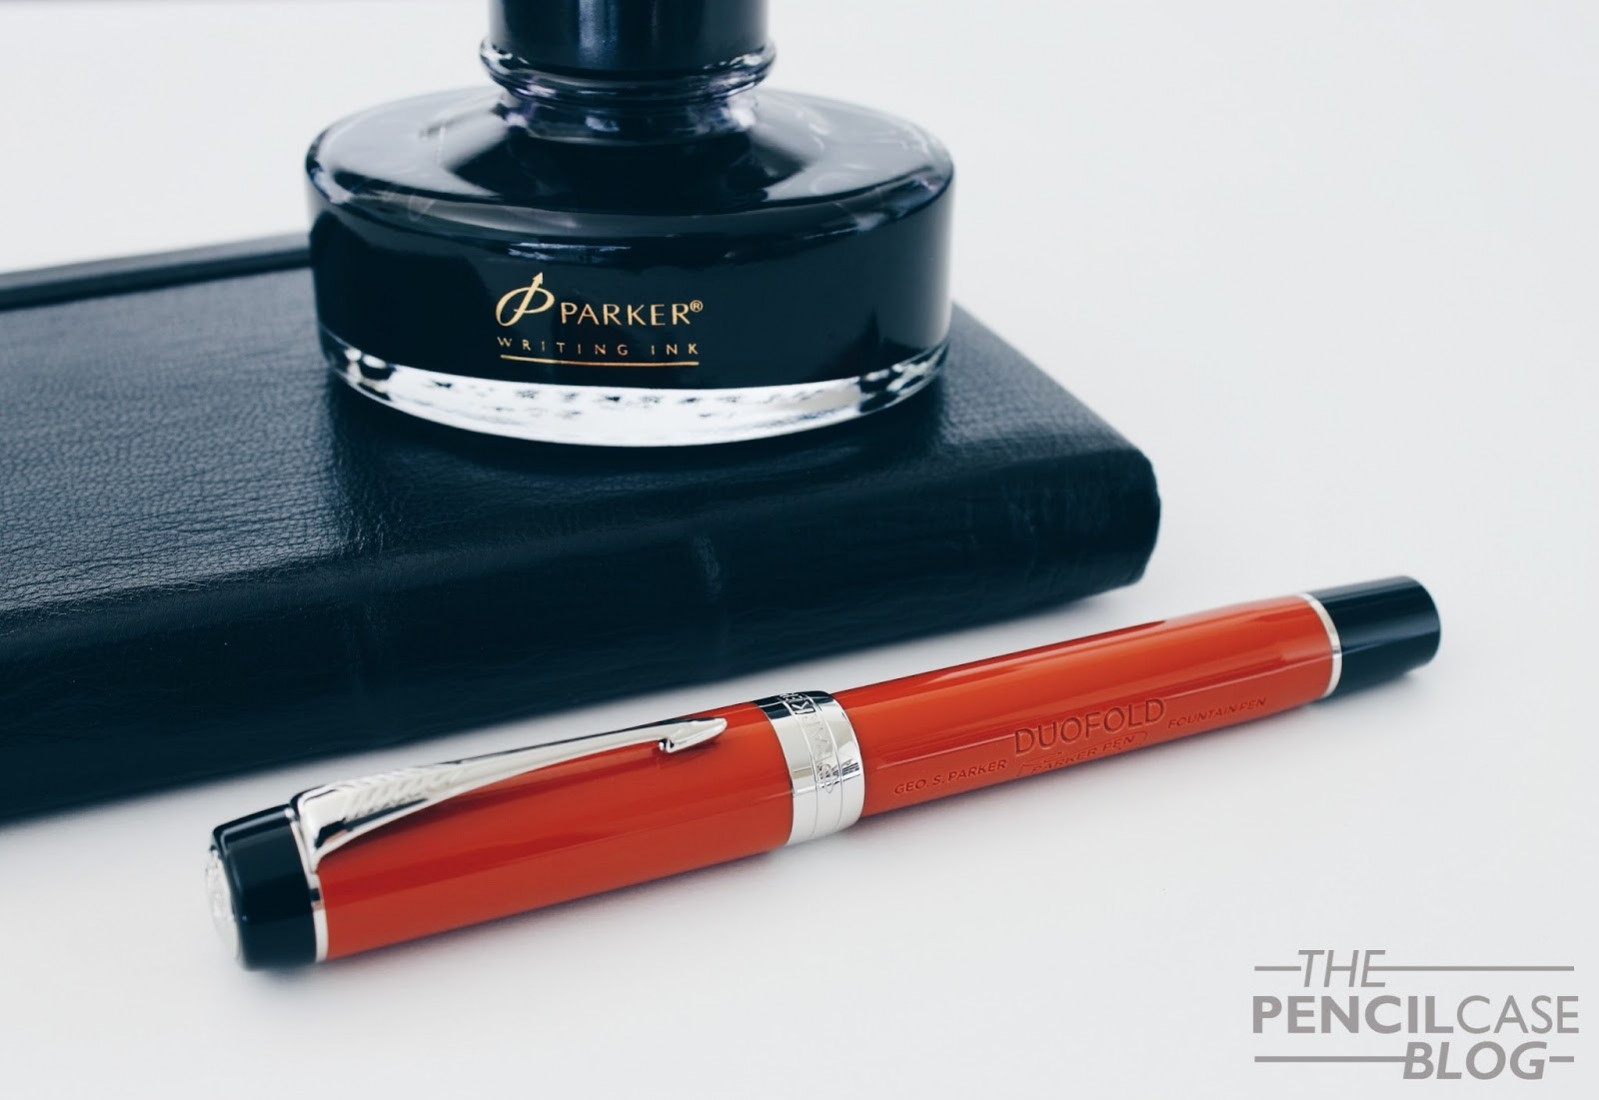 Parker Duofold Centennial Fountain Pen, Classic Big Red Vintage, Solid Gold Nib, Black Ink and Convertor (1931376)